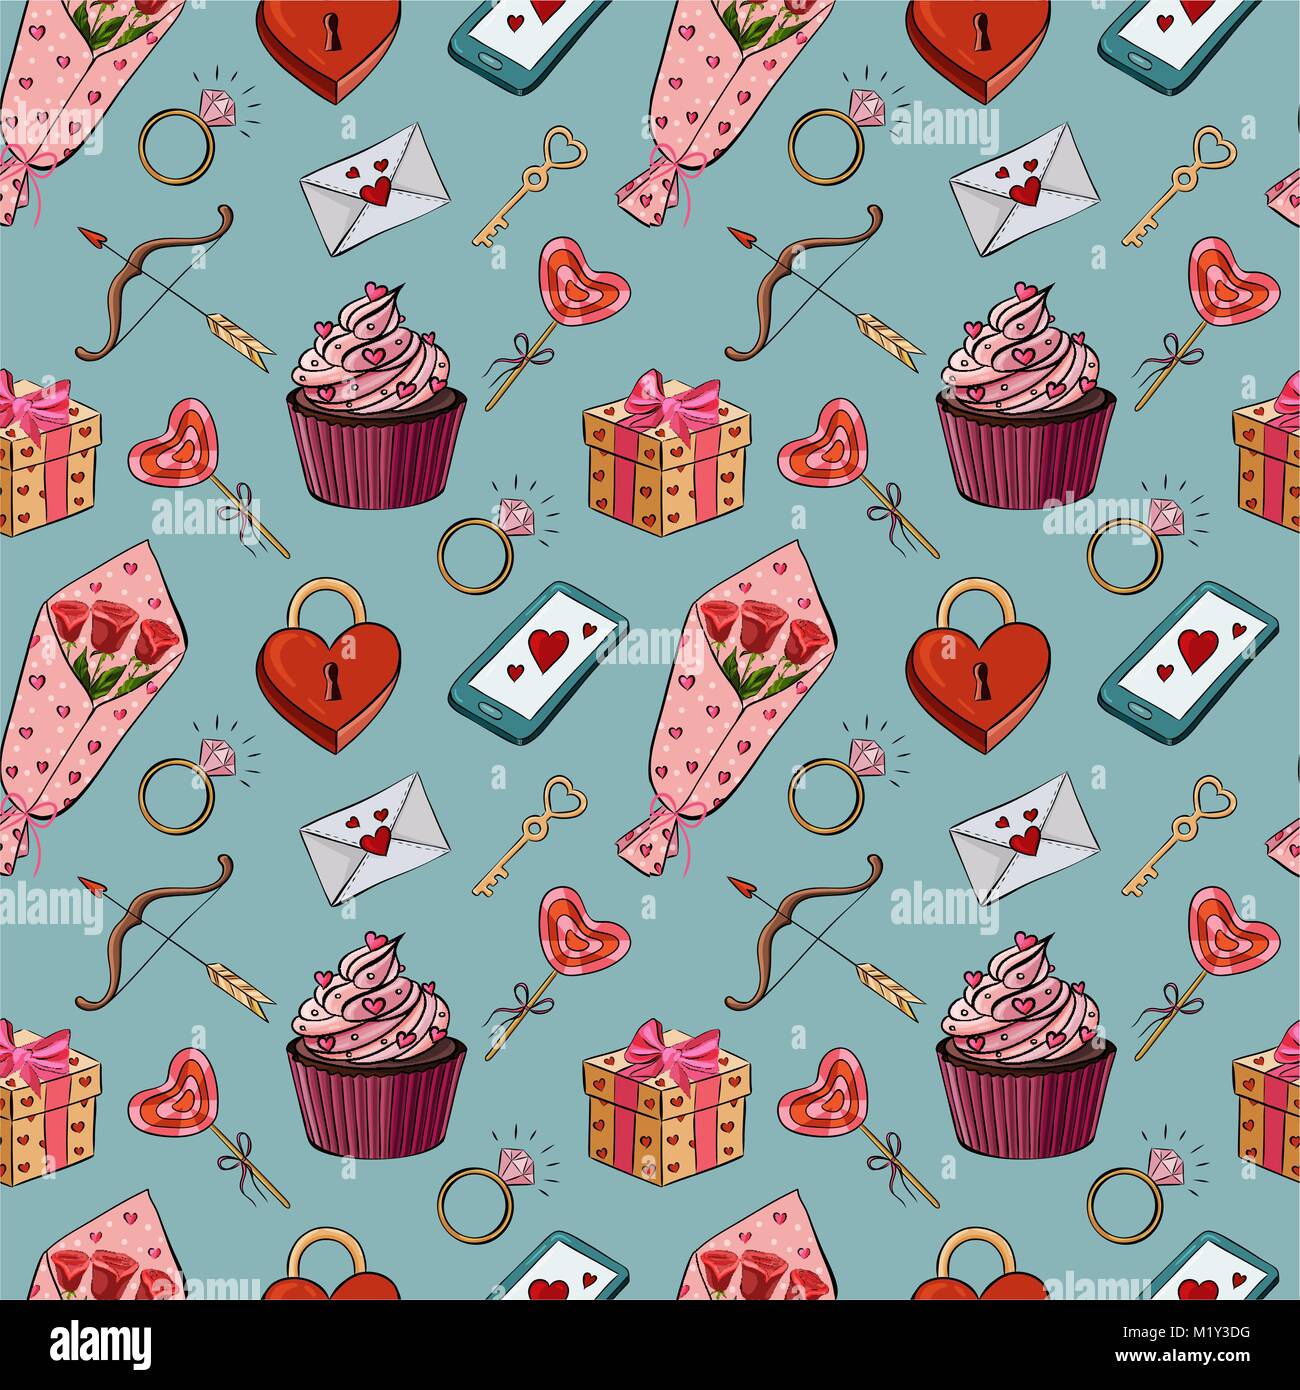 Vector illustration of a seamless pattern of sticker elements for Valentines day. Stock Vector